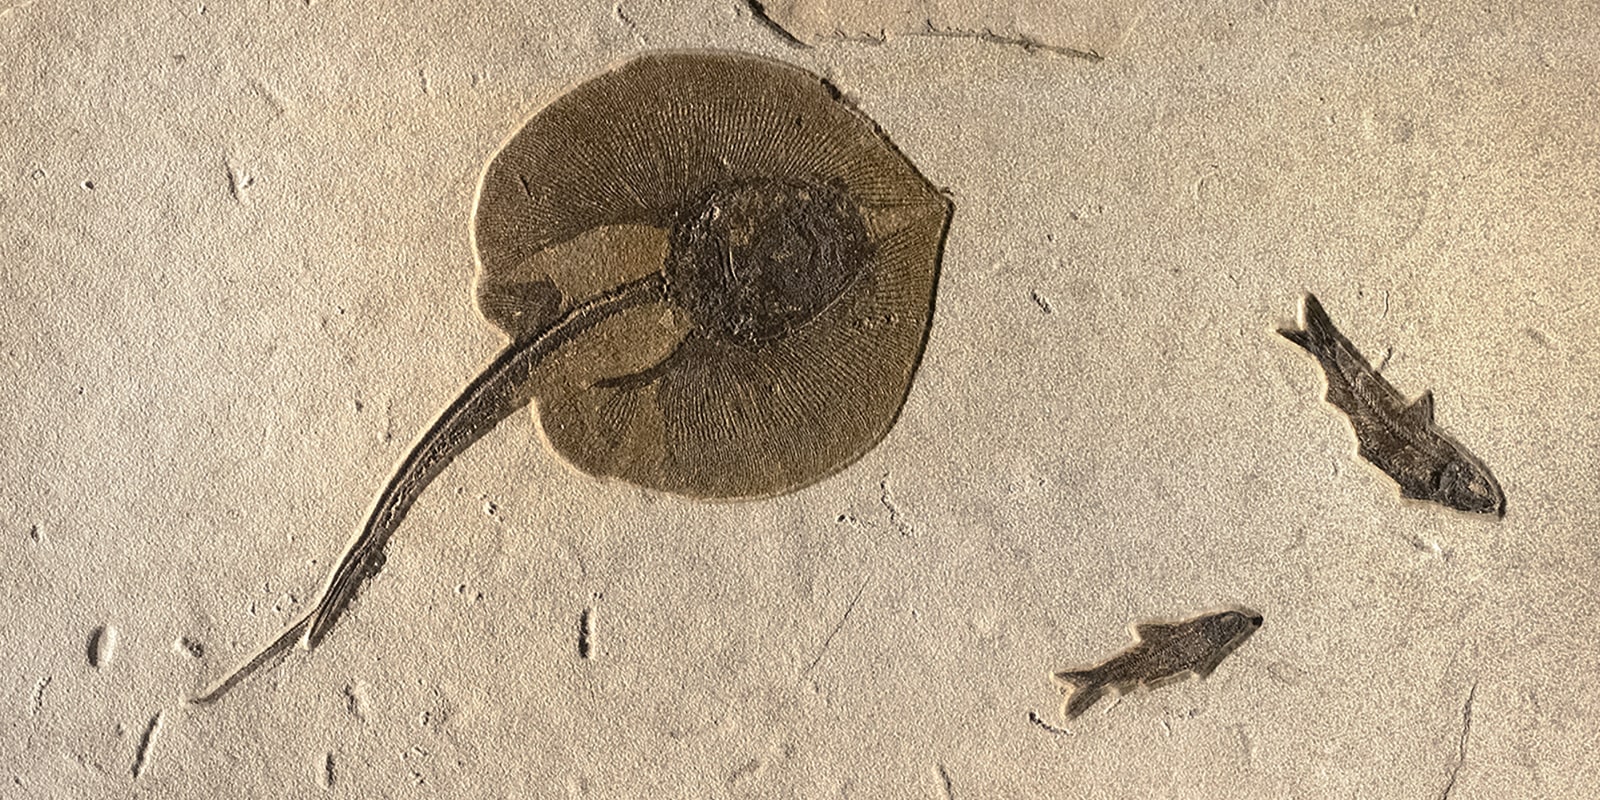 A detail view of a large mural that contains a rare fat-tail stingray Asterotrygon maloneyi and two Knightia eocaena. The fossils date to the Early Eocene, 50 million years old. Asterotrygon was first described in 2004.